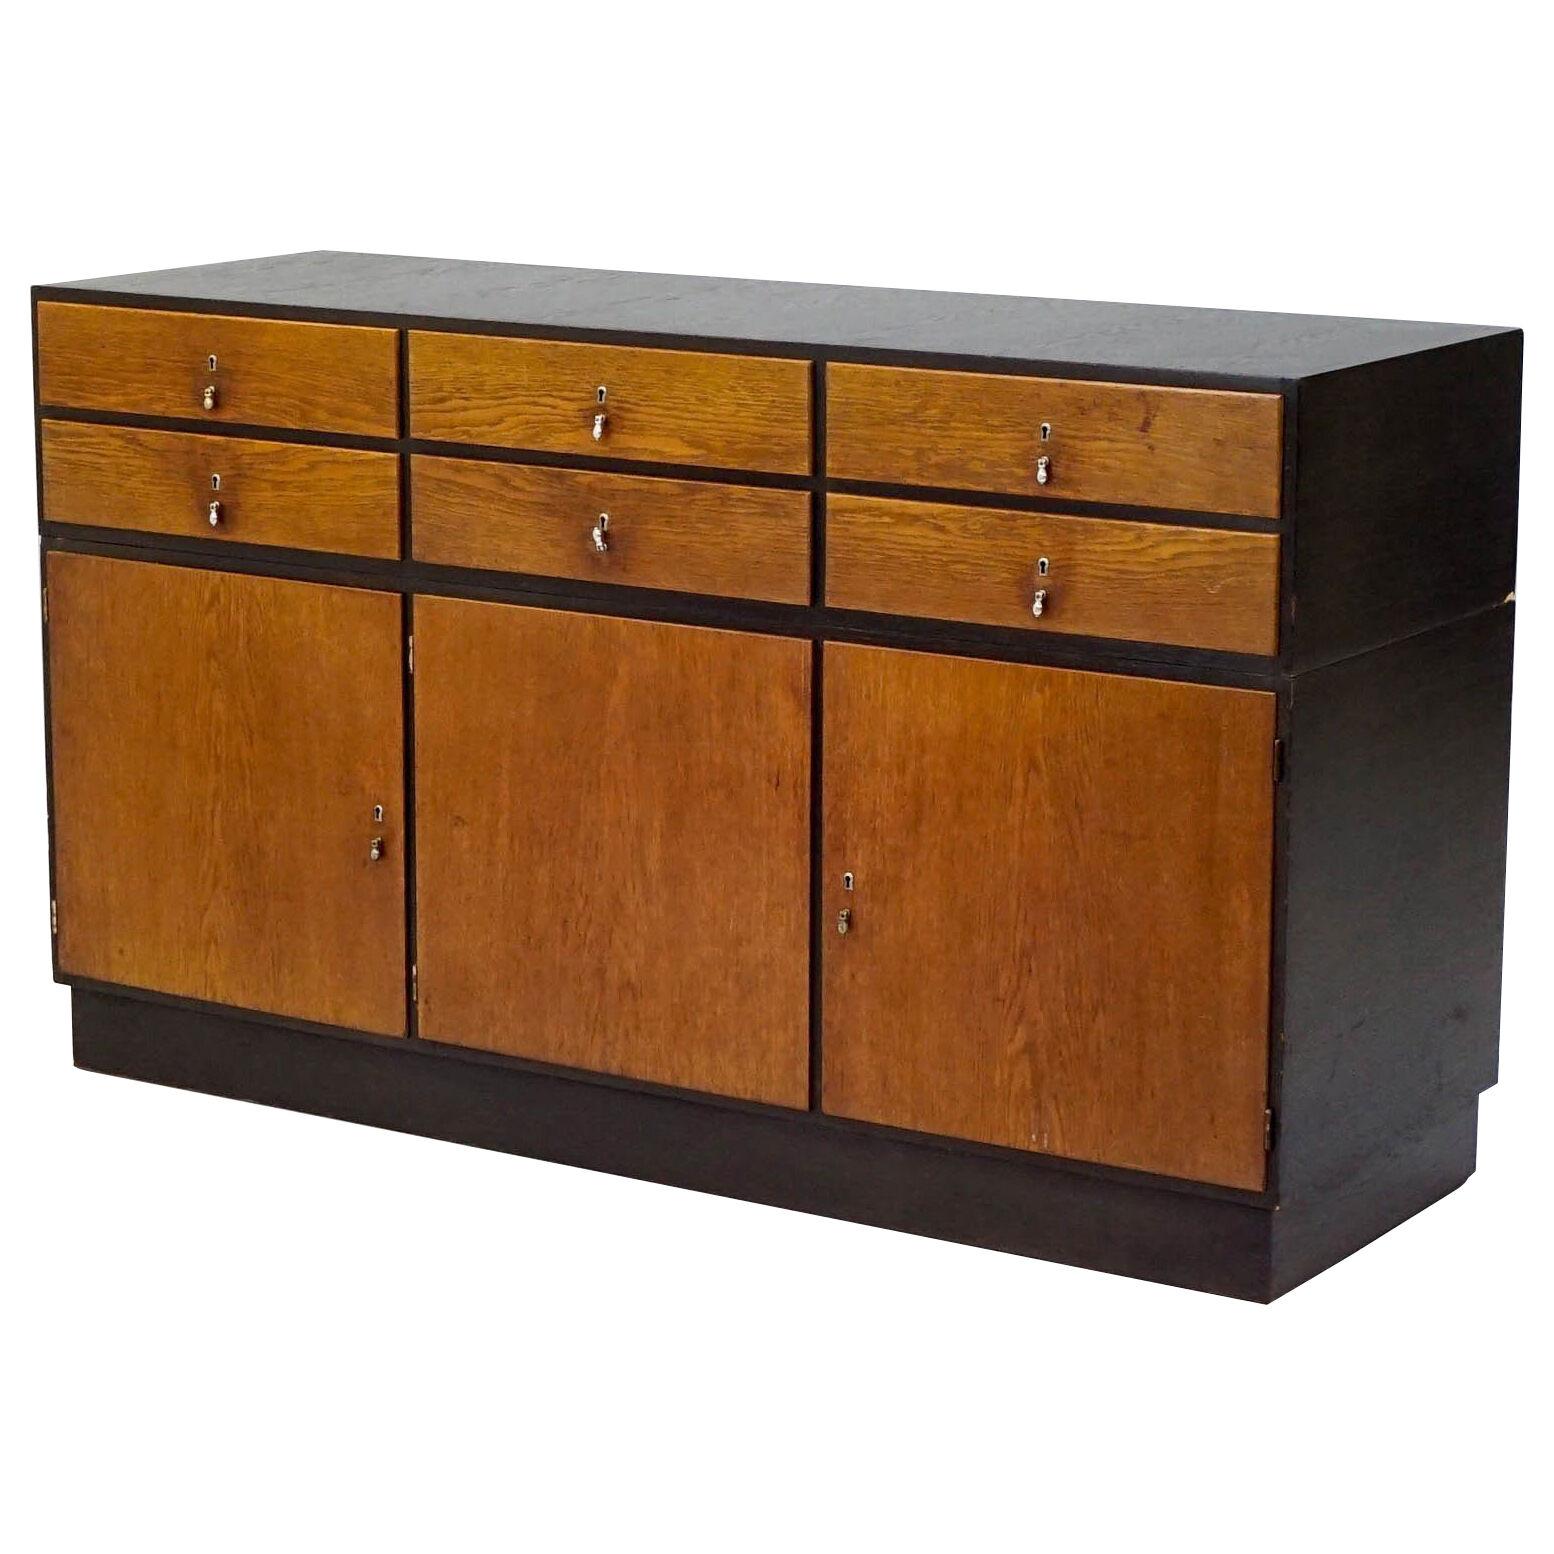 1930s Sectional Sideboard by Franz Schuster